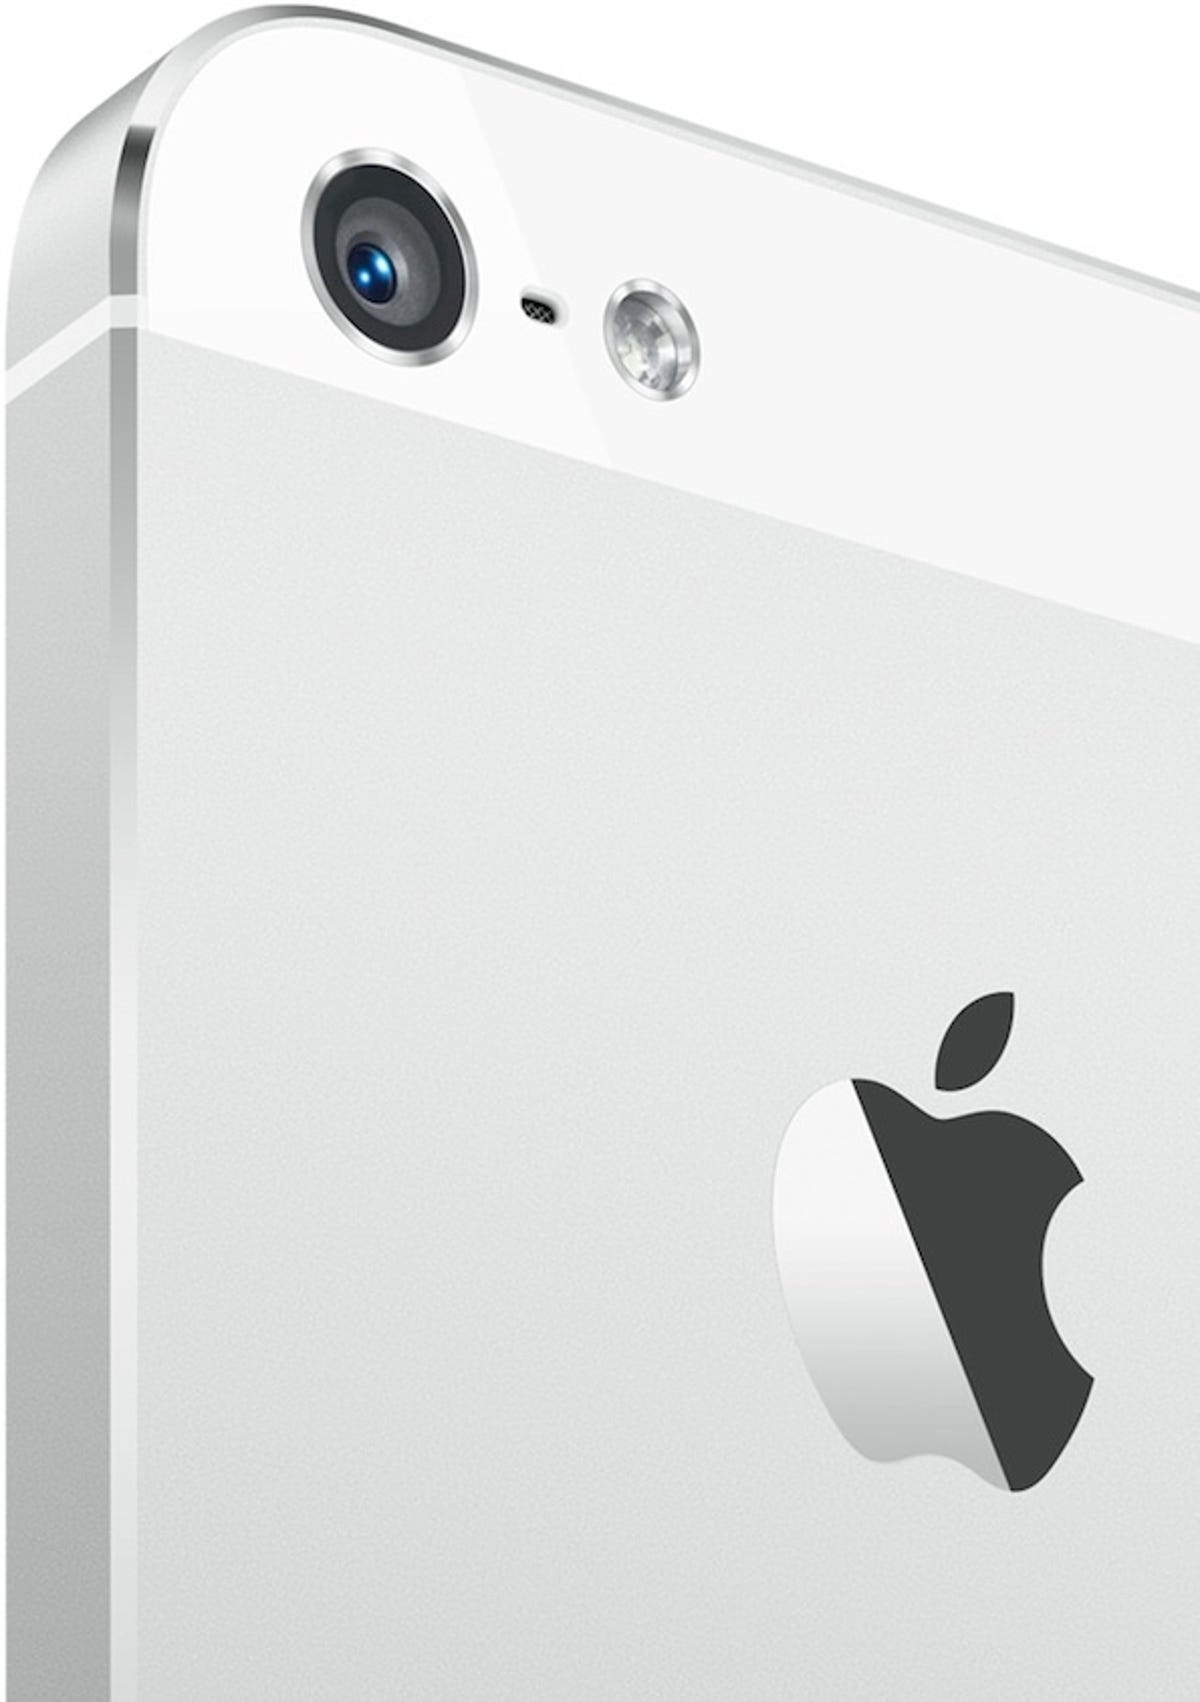 Current iPhone 5 has sapphire lens cover.